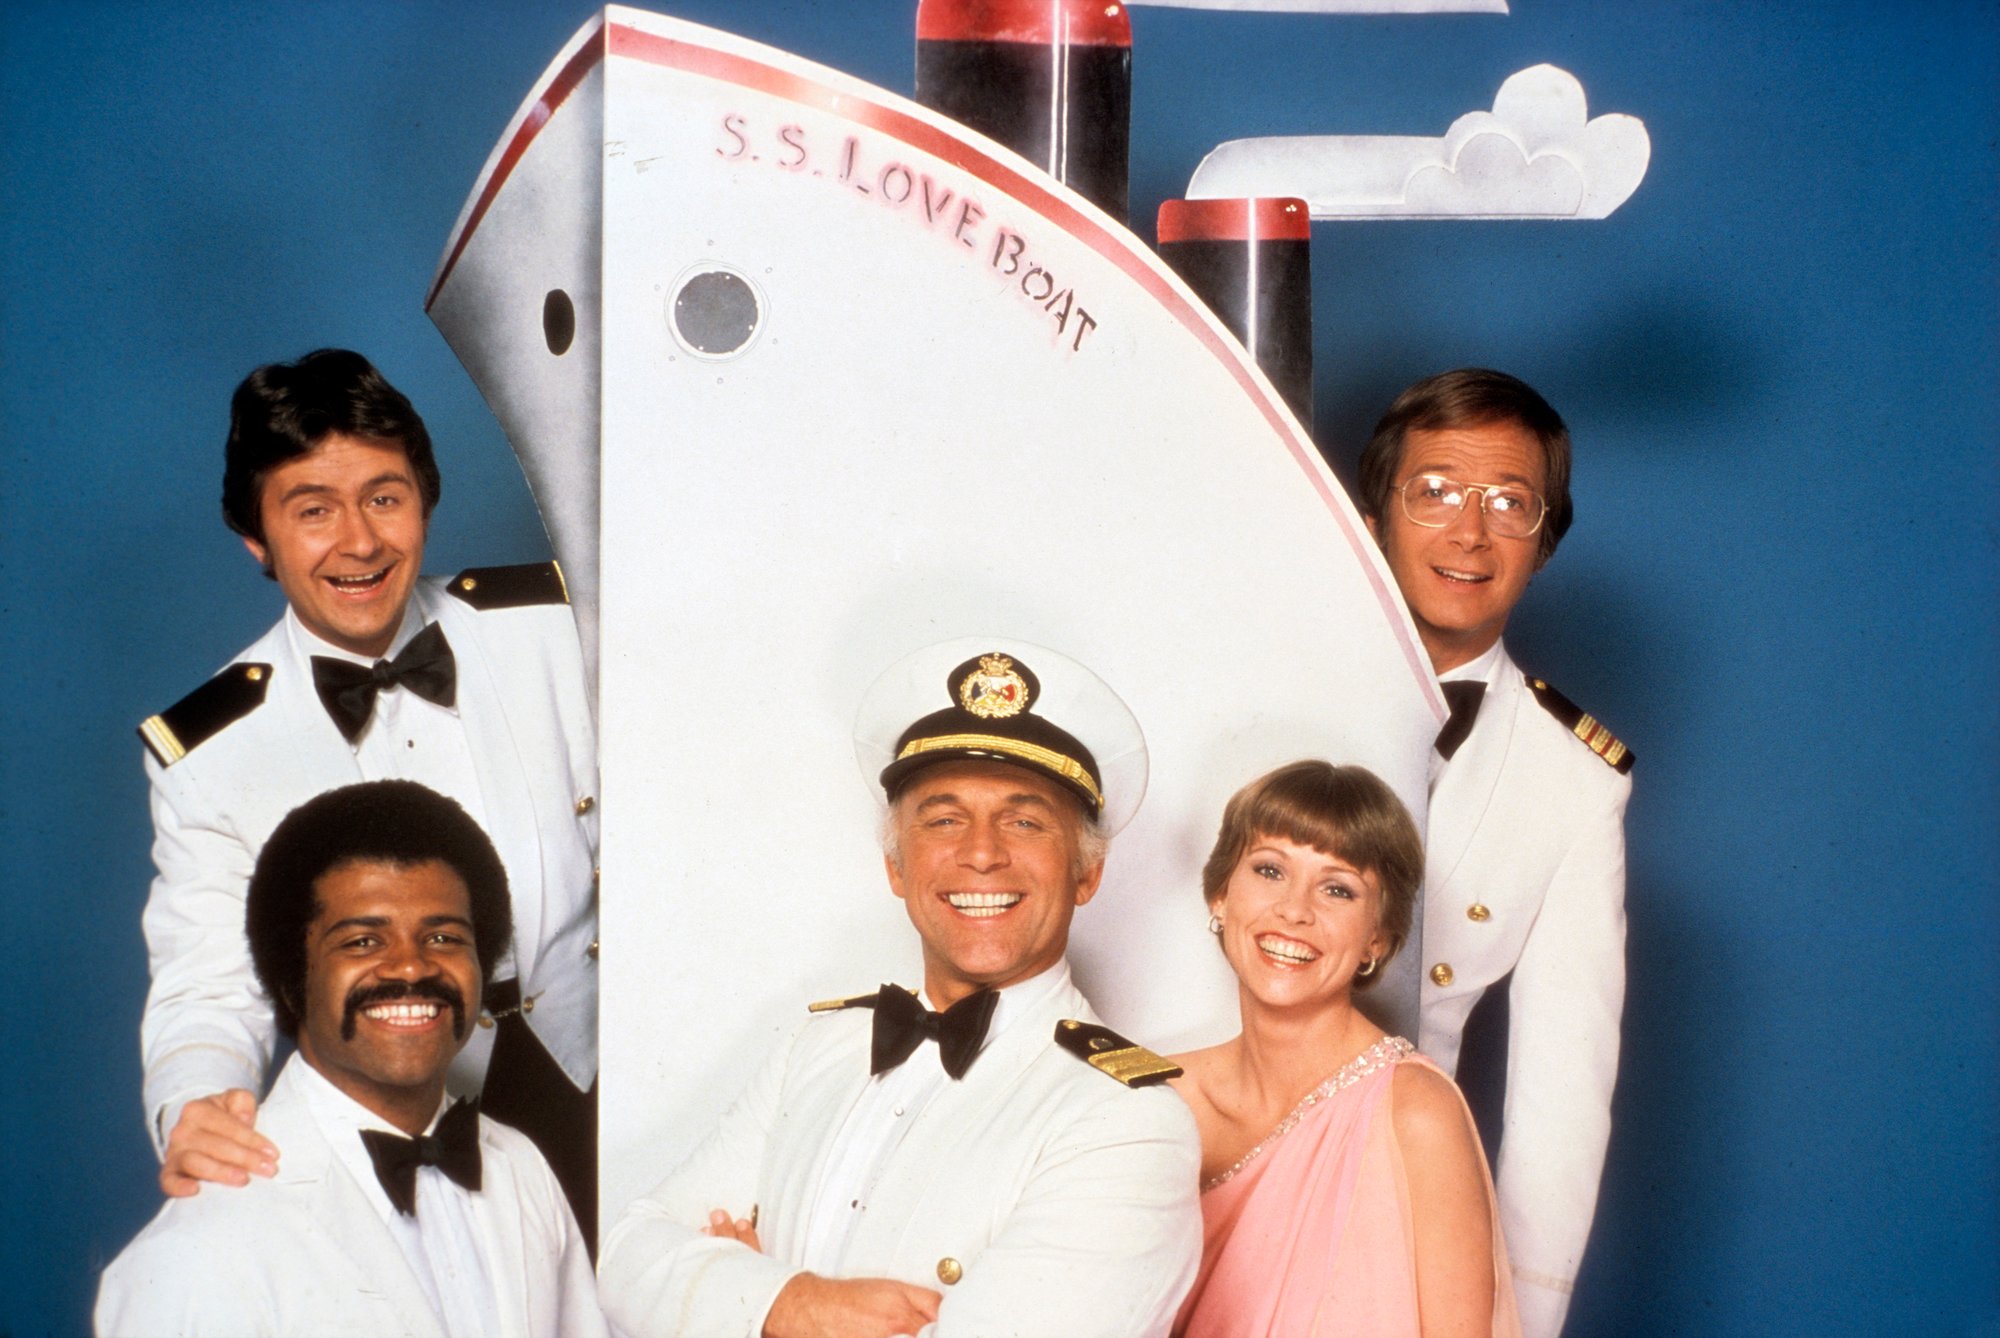 (L-R) Fred Grandy as Gopher Smith, Ted Lange as Isaac Washington, Gavin MacLeod as Captain Merrill Stubing, Lauren Tewes as Julie McCoy, Bernie Kopell as Dr. Adam Bricker smiling in front of a blue background and prop ship